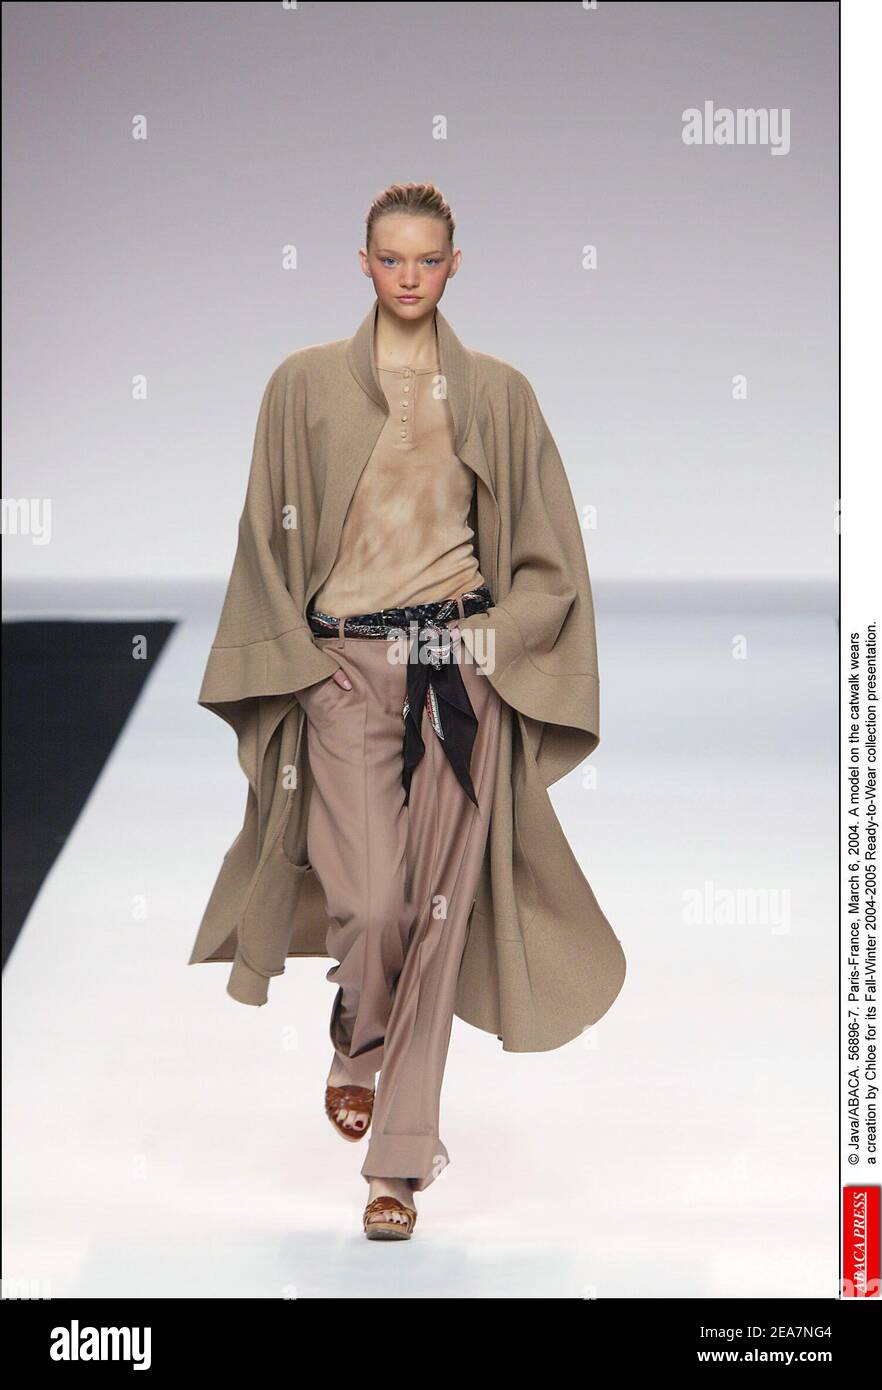 © Java/ABACA. 56896-7. Paris-France, March 6, 2004. A model on the catwalk wears a creation by Chloe for its Fall-Winter 2004-2005 Ready-to-Wear collection presentation. Stock Photo